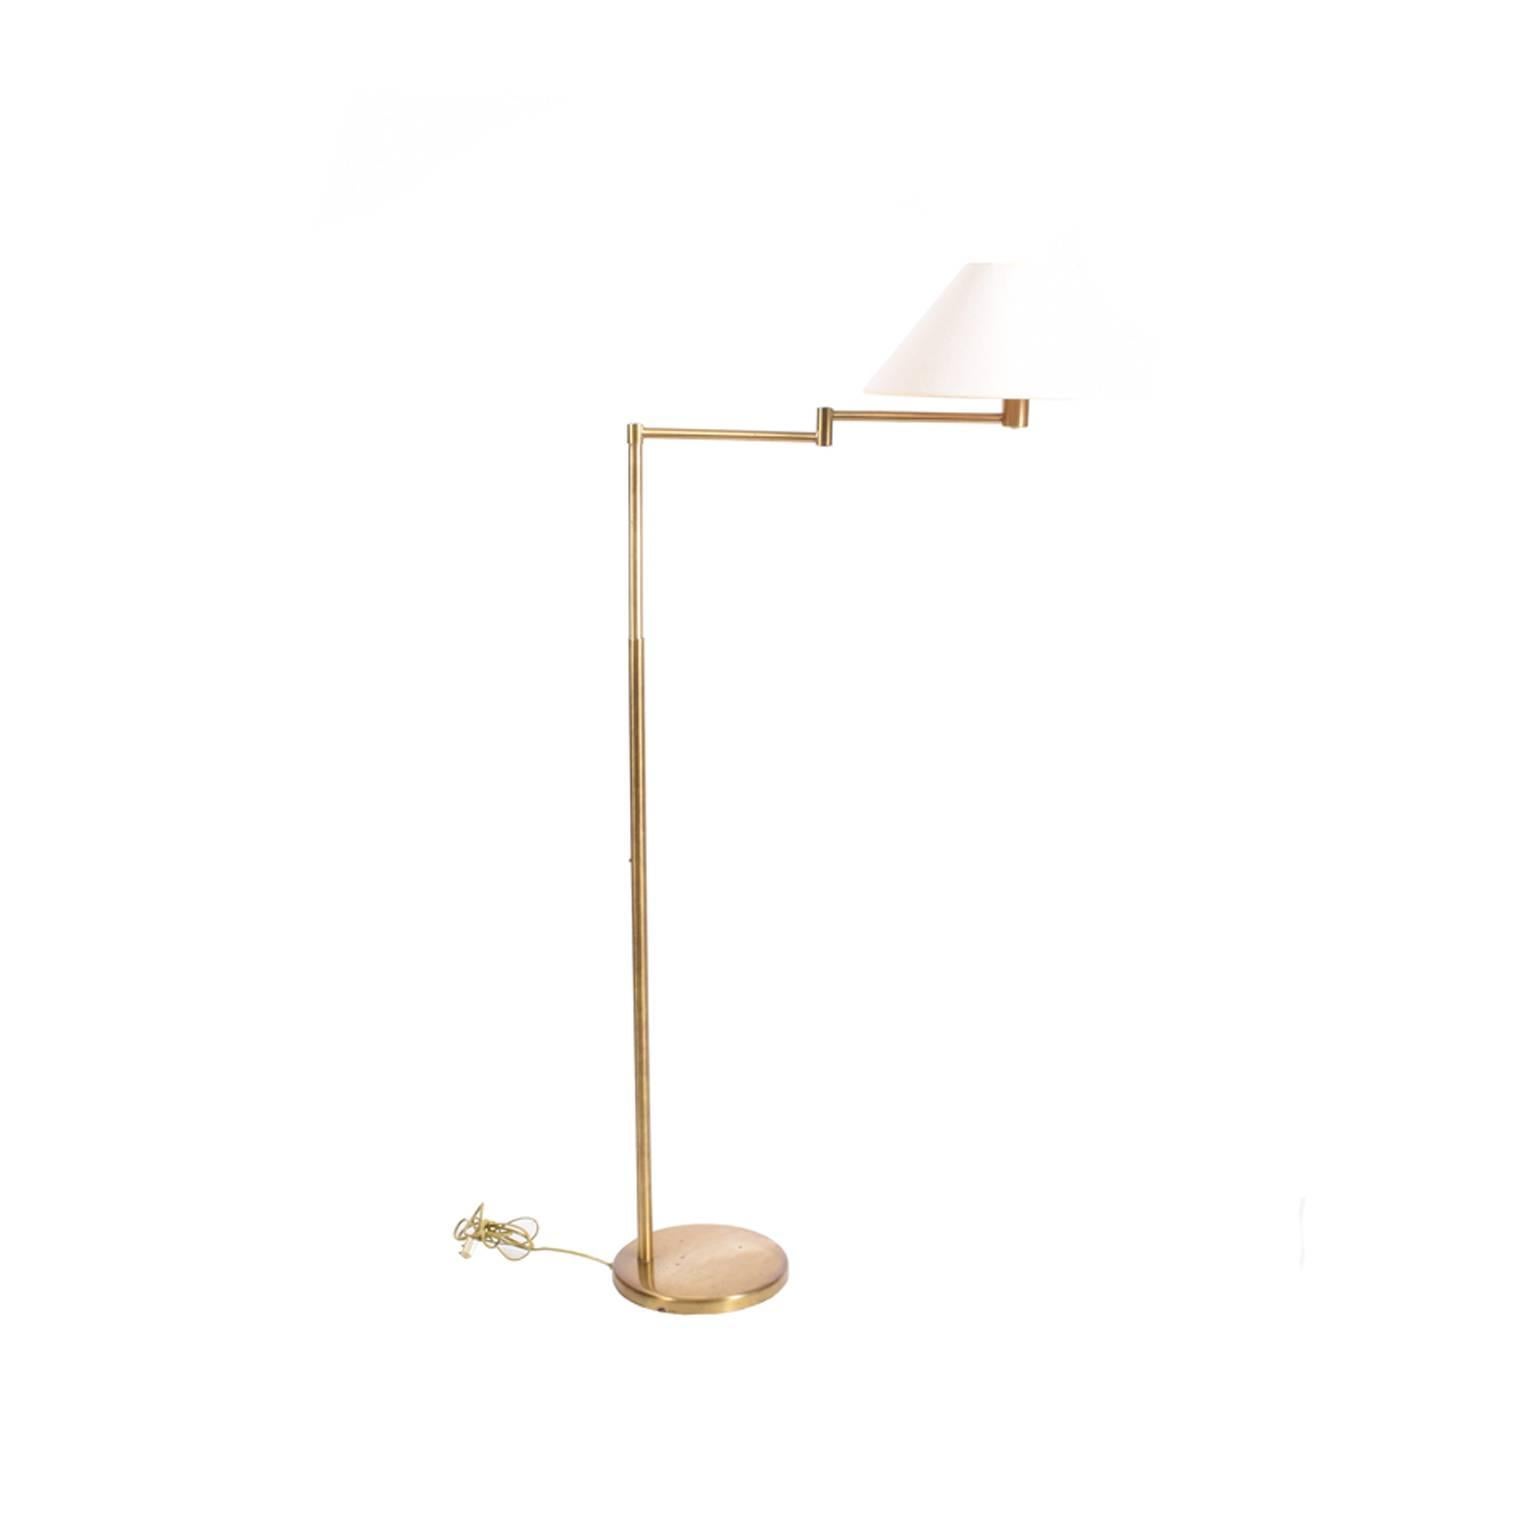 Original floor lamp adjustable height with original shade and glass defuser mark on the arm and bottom. Measures: Height 49